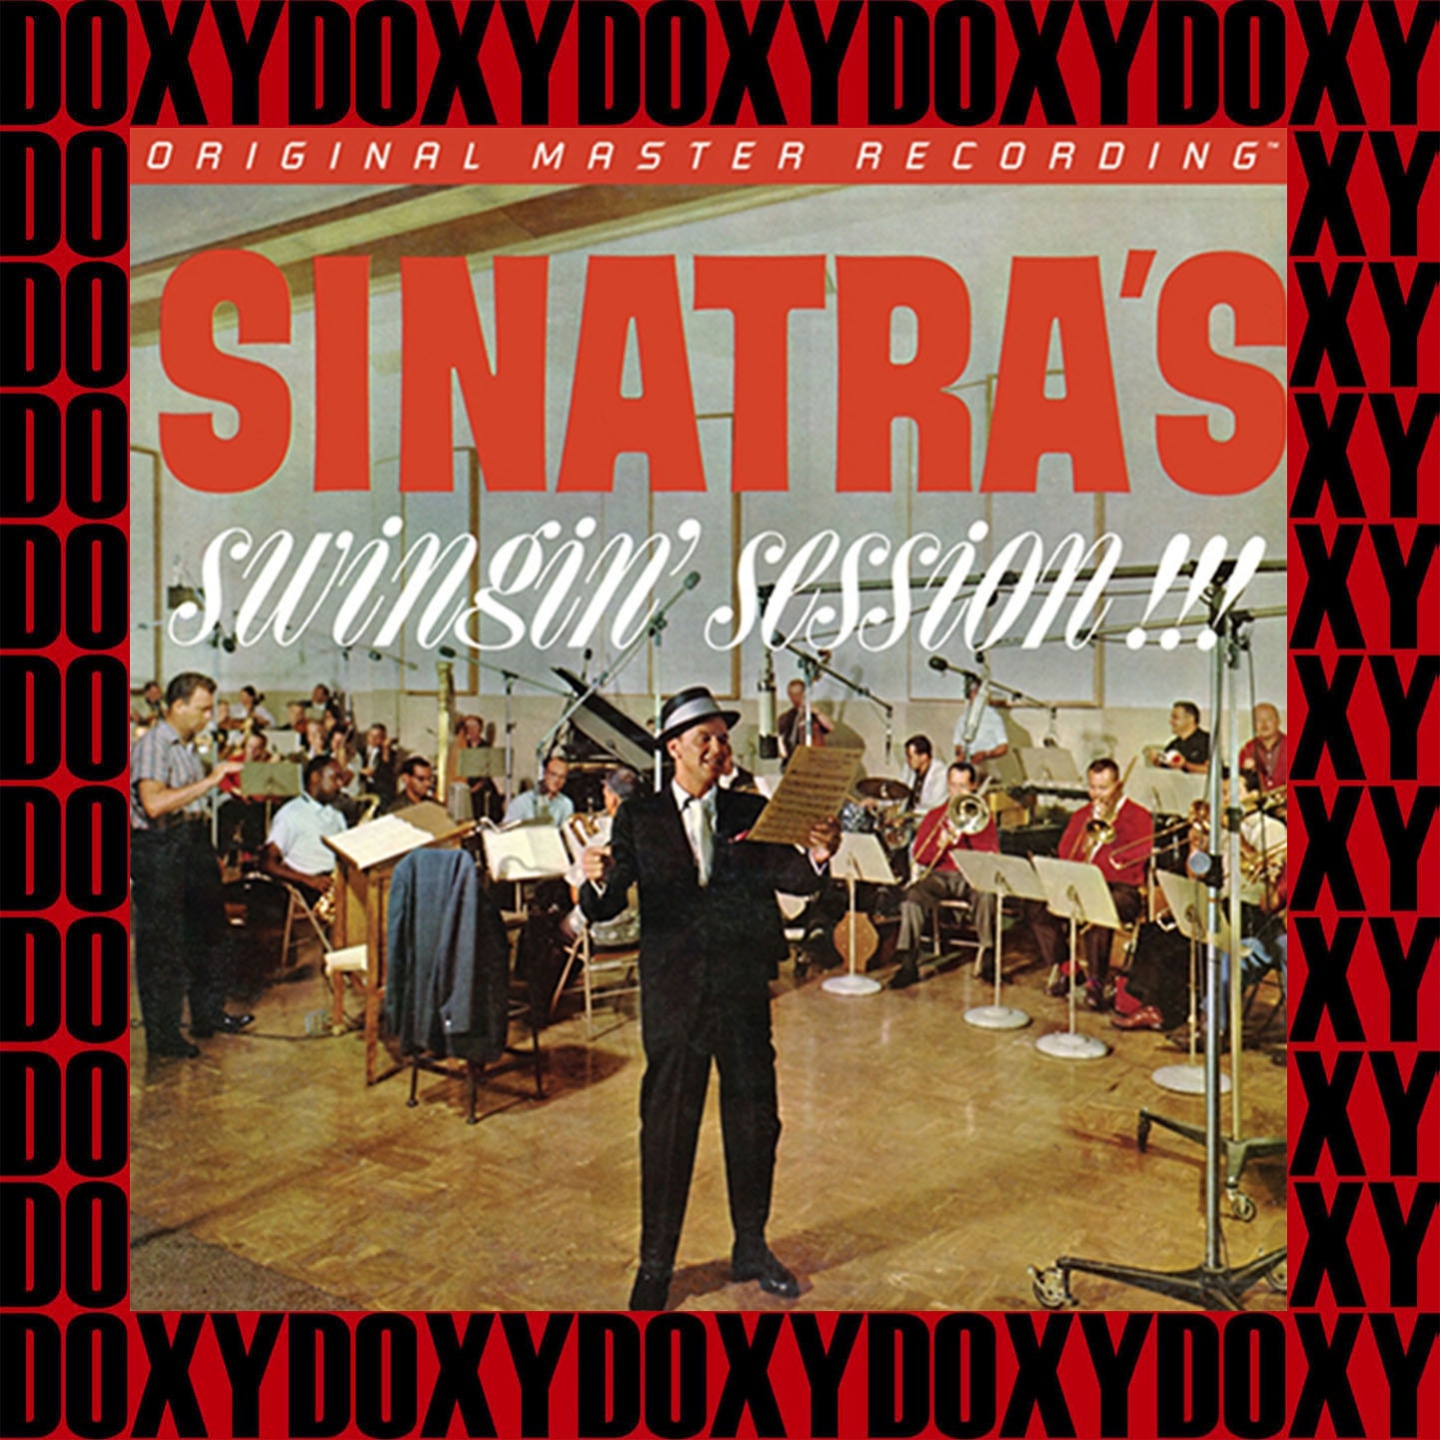 Sinatra's Swingin' Session (Remastered Version) (Doxy Collection)